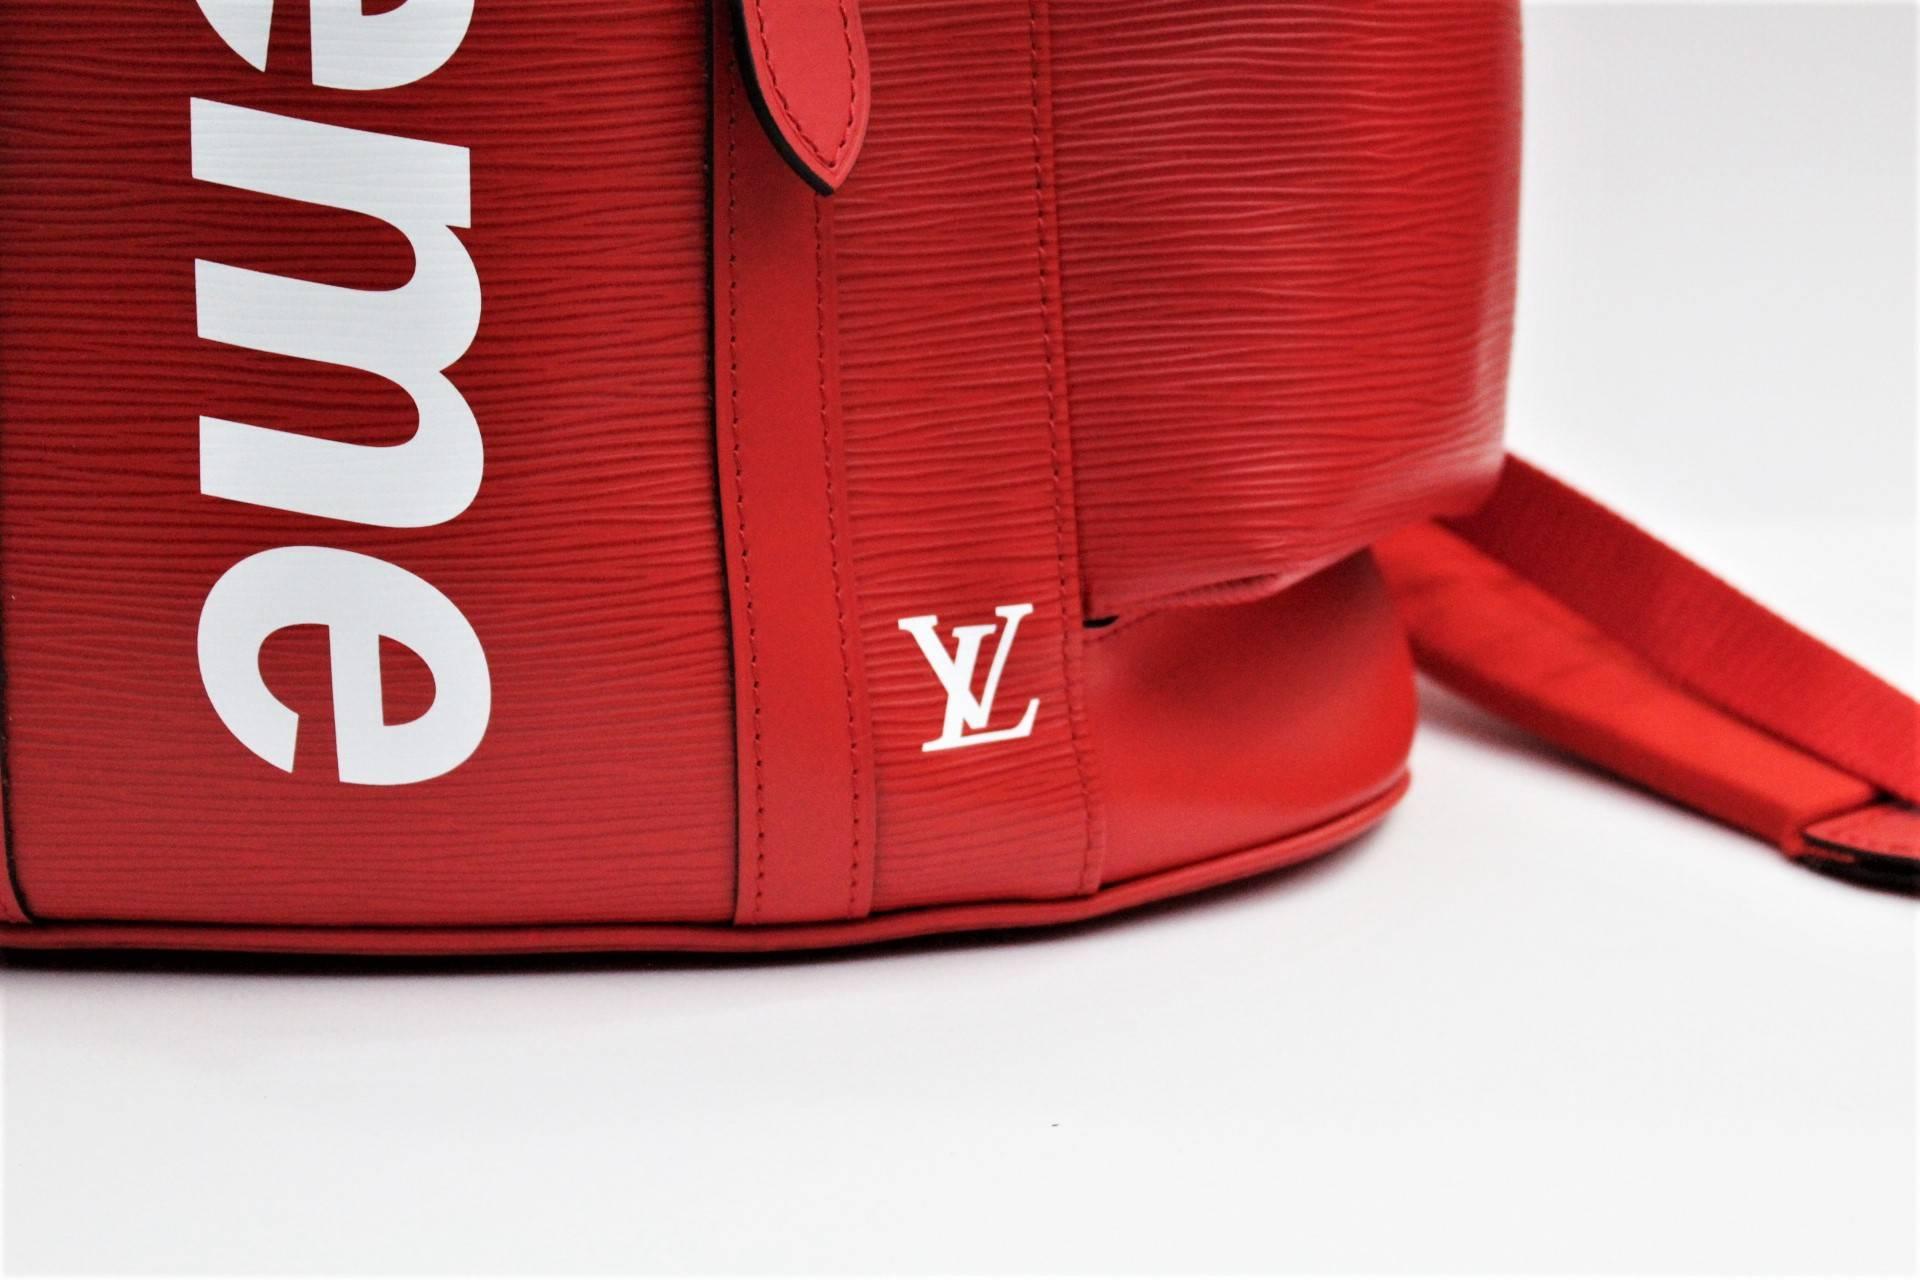 The Louis Vuitton x Supreme Christopher backpack in red is a structured bag dripping in style. It comes with adjustable leather shoulder straps, a leather top handle, flap opening, press stud and drawstring closure as well as several pockets inside.